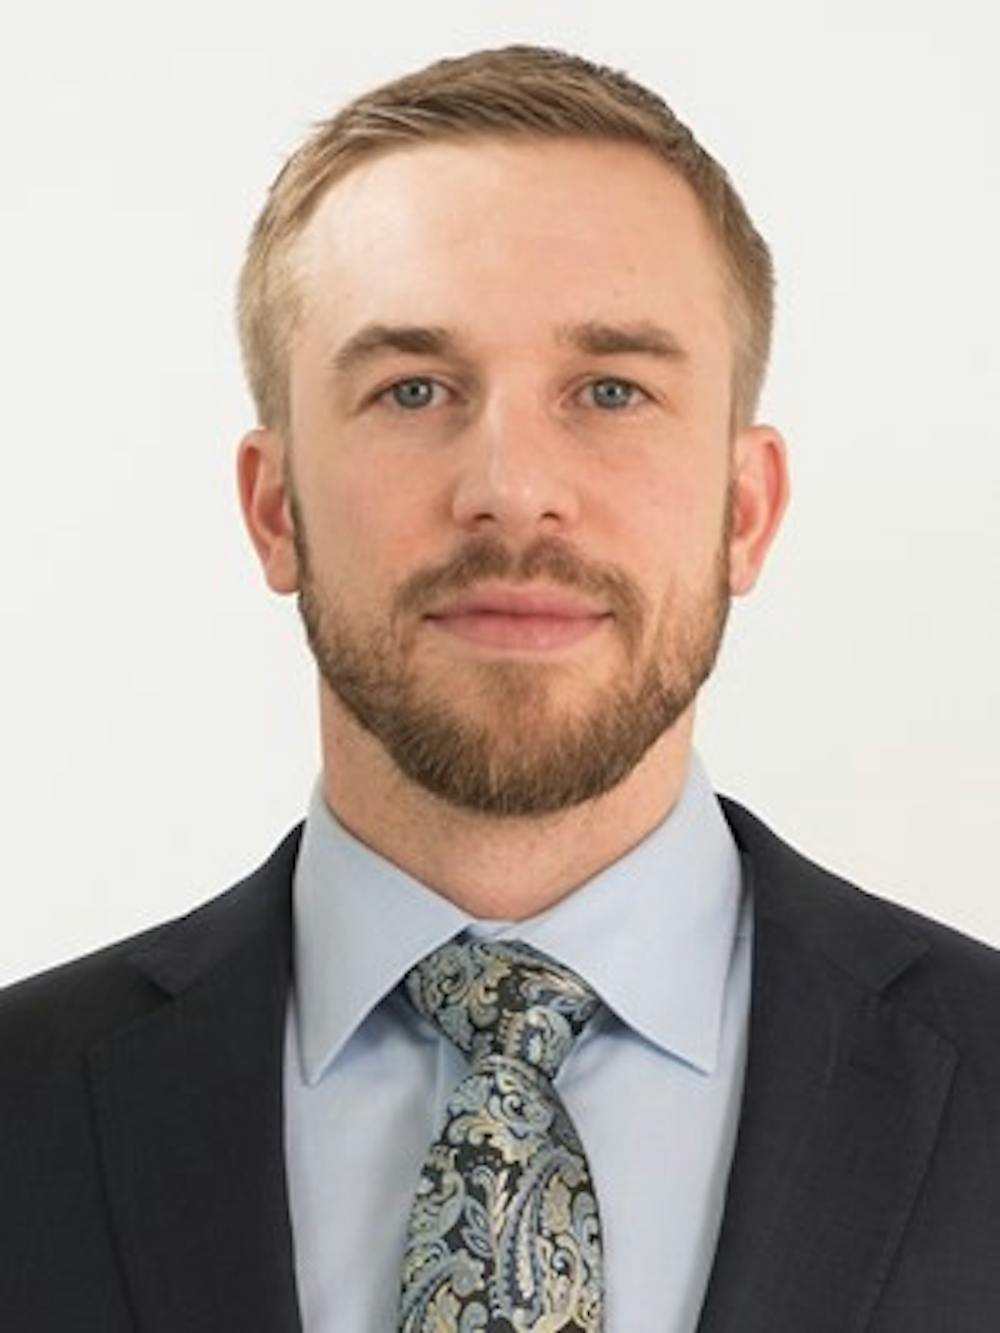 <p>Muncie native Ben Botts joined the Ball State men's basketball coaching staff over the summer. Botts helped lead Muncie Central to its most recent Class 4A State Championship appearances in 2005 and 2006. <strong>Ball State Athletics, Photo Provided</strong></p>